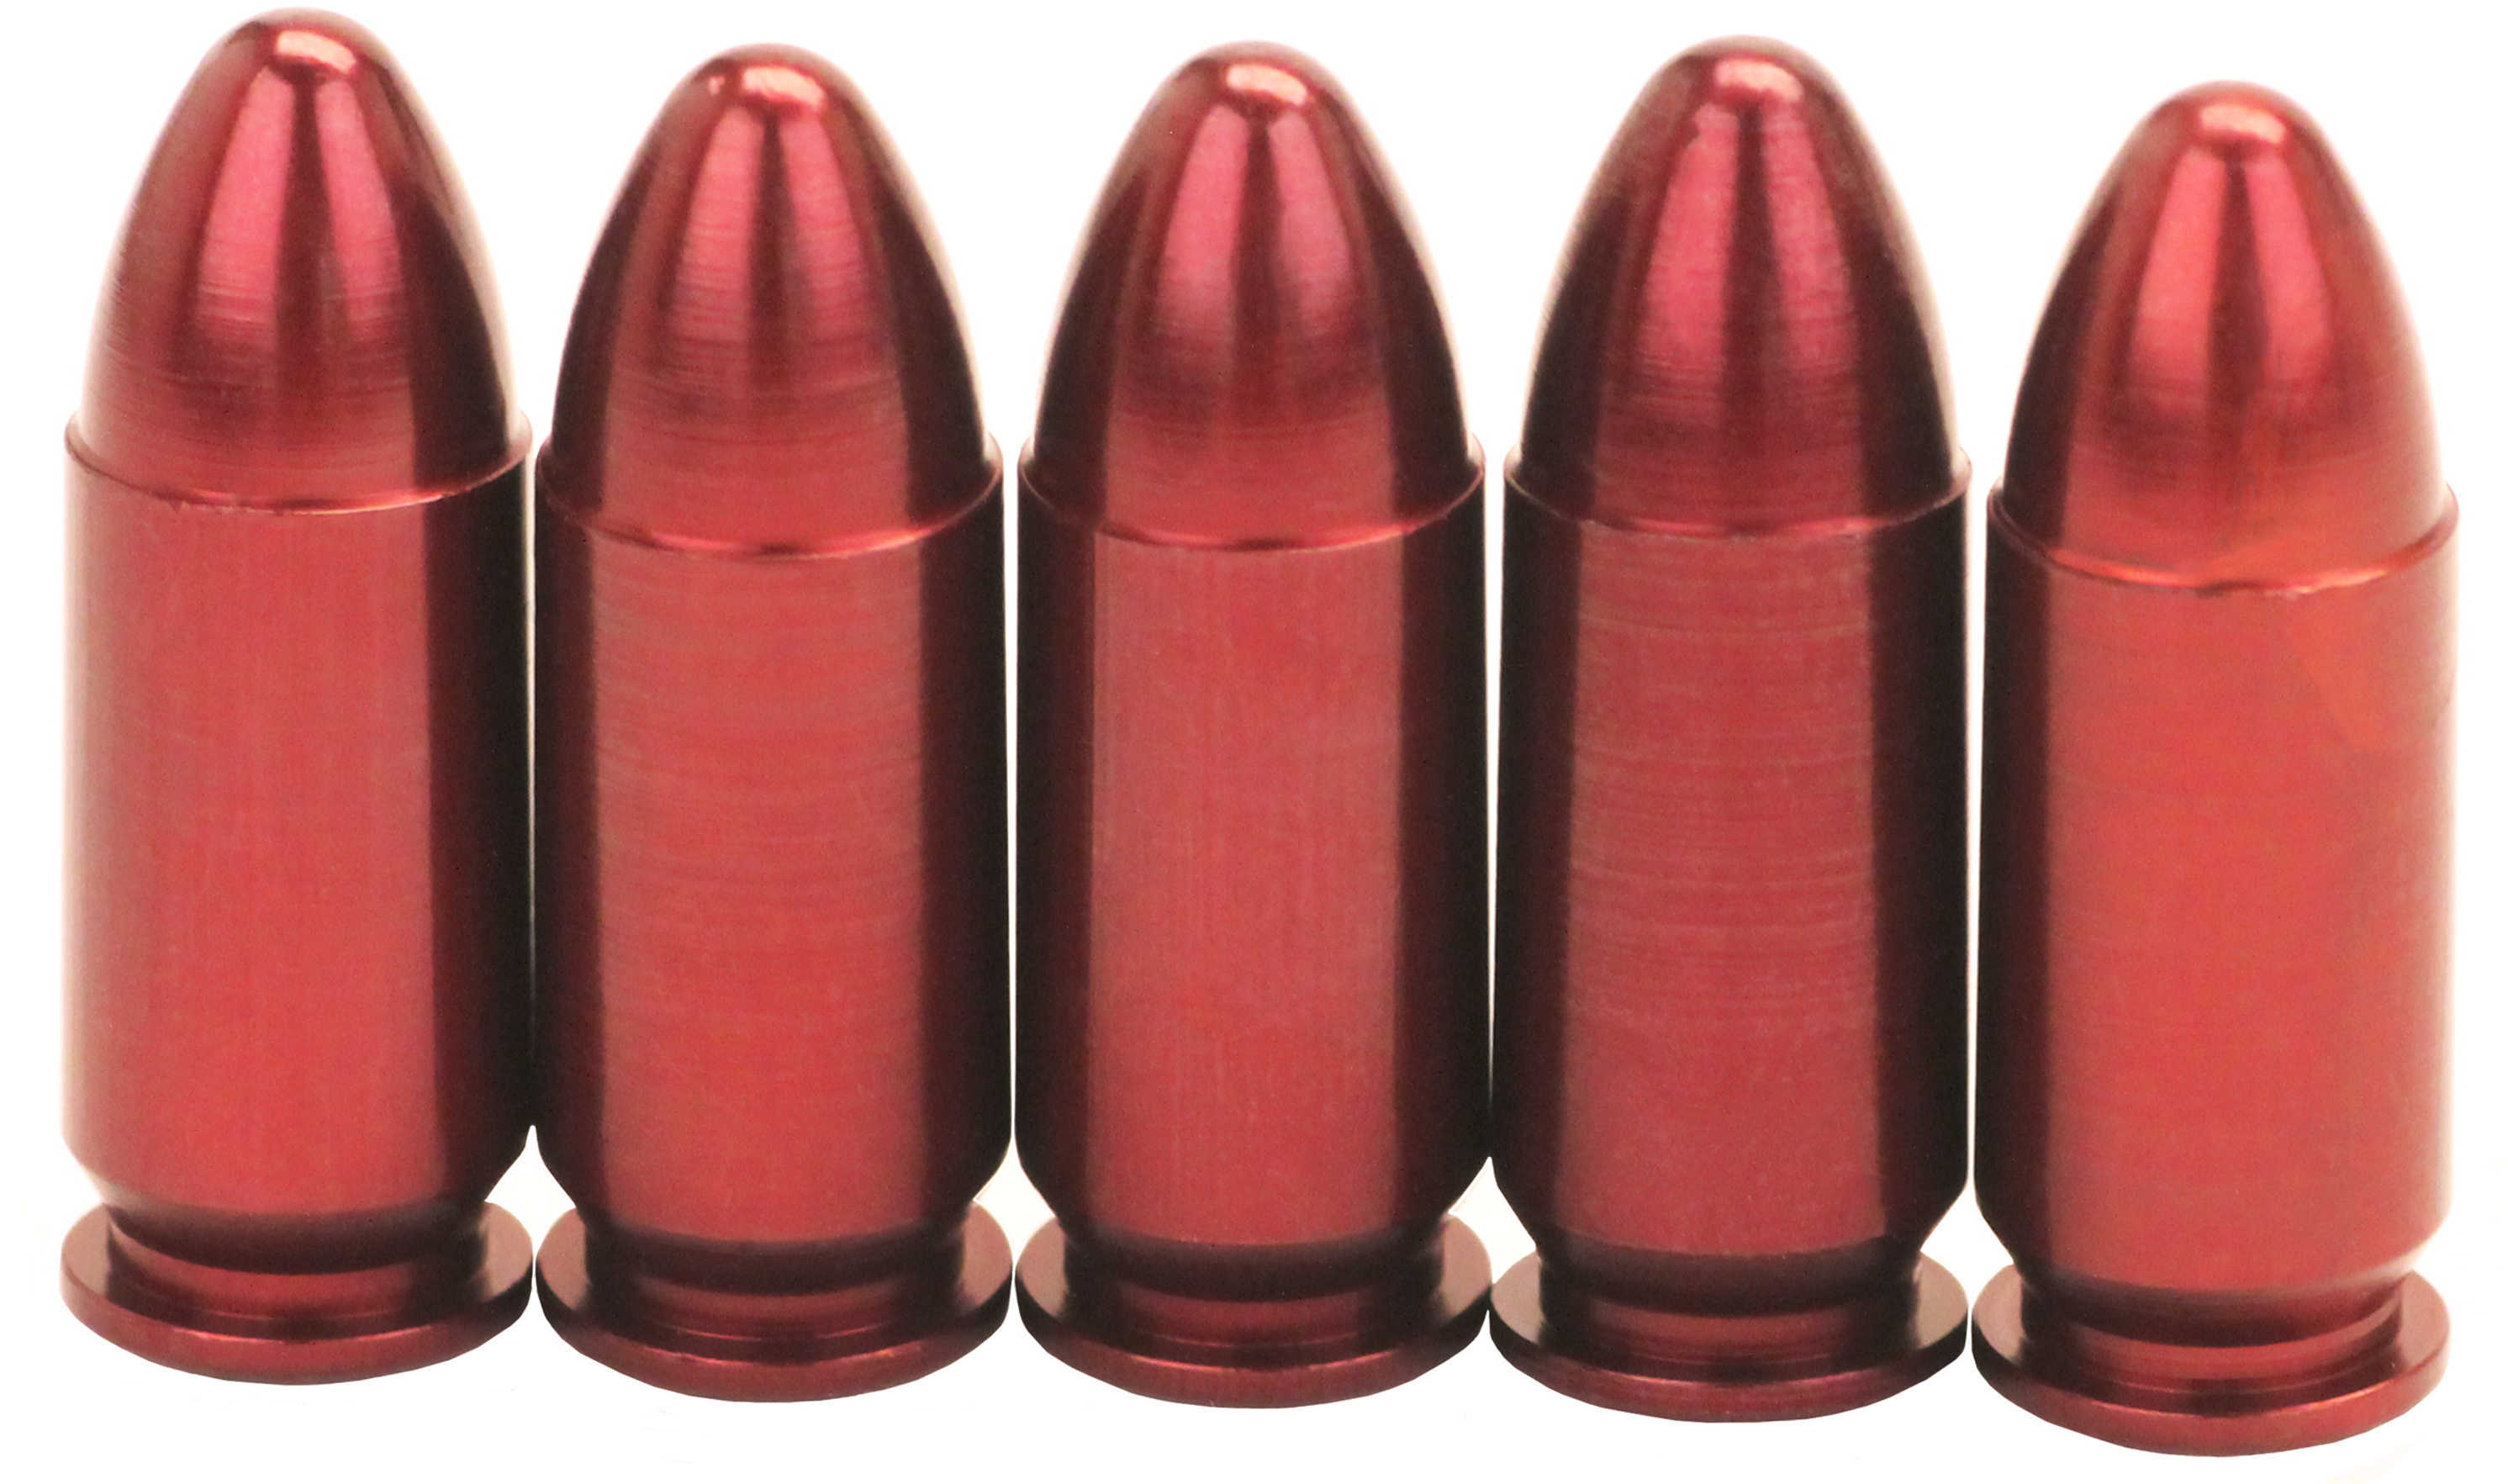 A-Zoom 9MM Luger Snap Cap 5 Pack